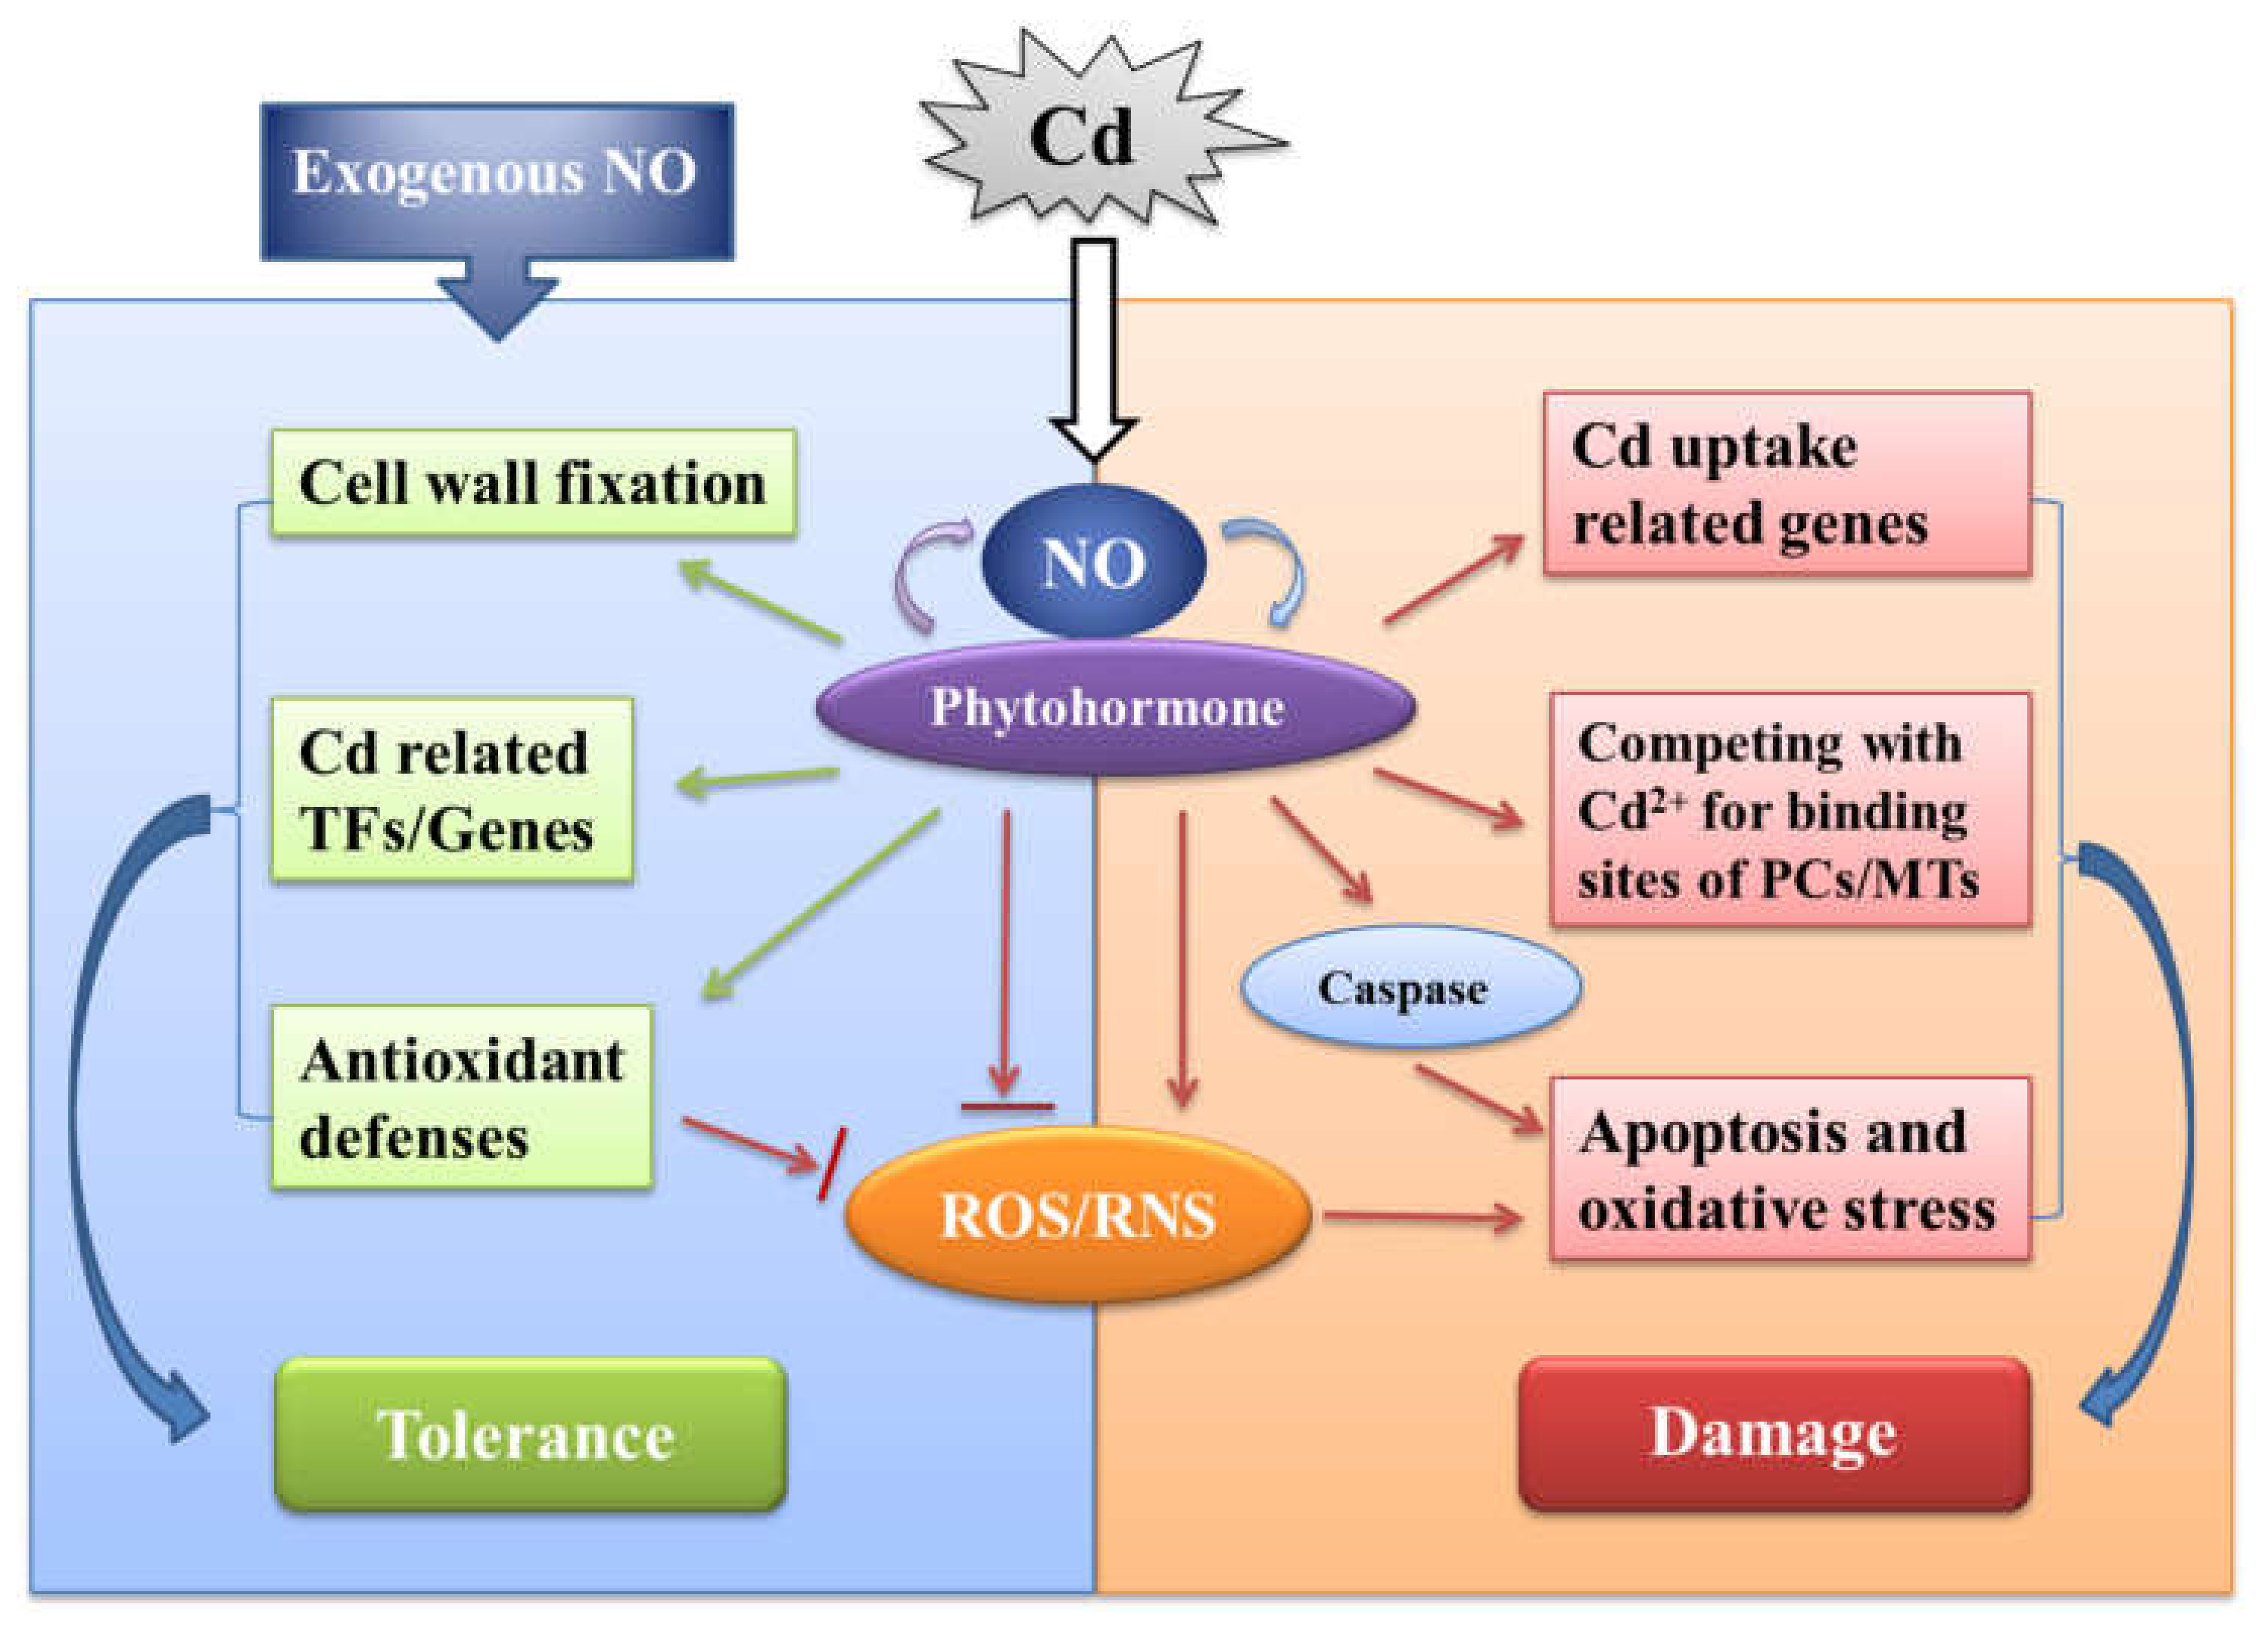 Nitric oxide and relaxation response